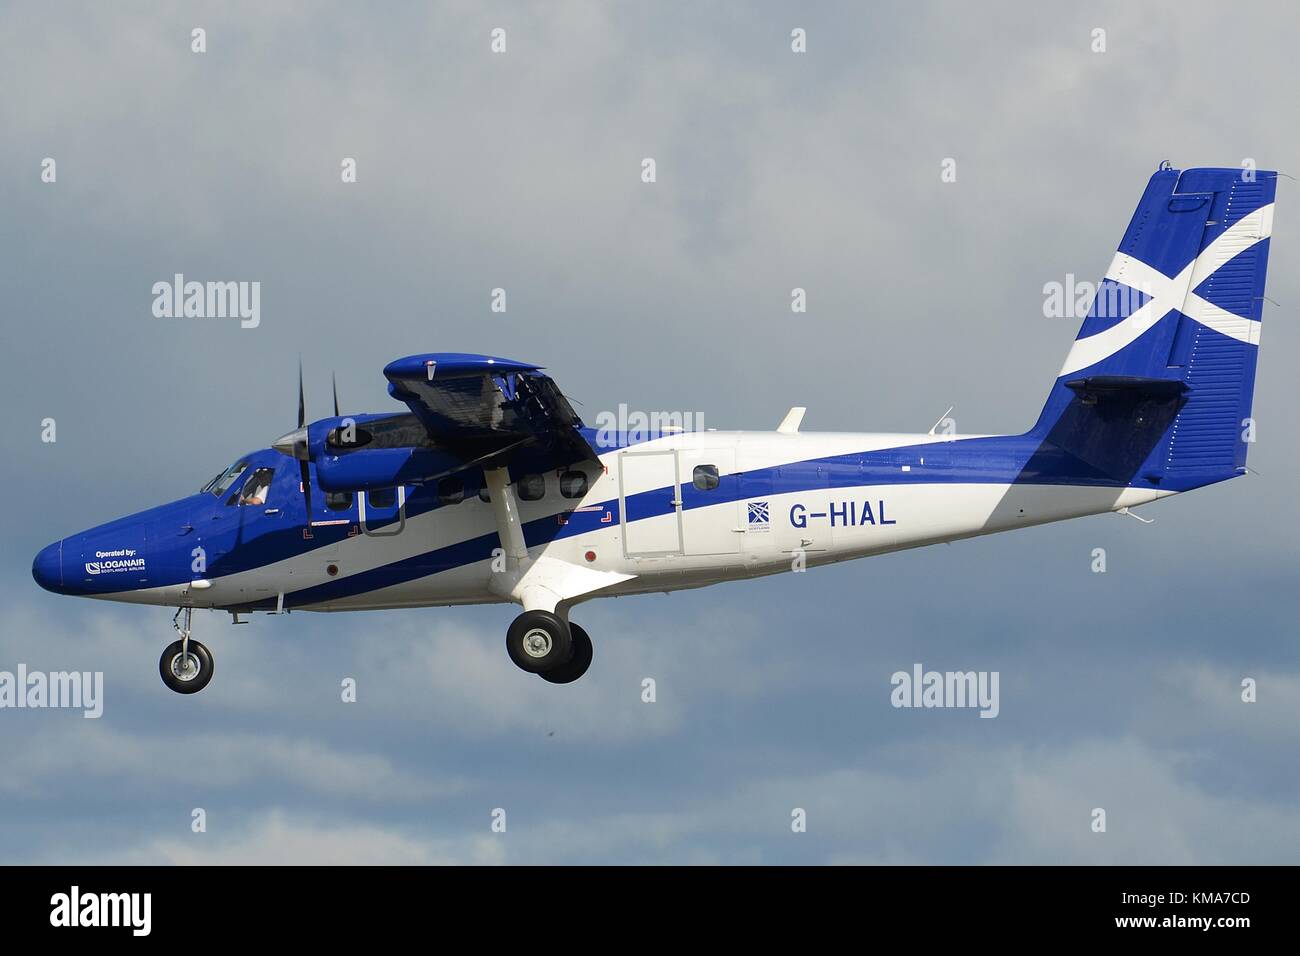 G-HIAL DHC-6-400 TWIN OTTER OF THE SCOTTISH GOVERNMENT AND OPERATED BY LOGANAIR. Stock Photo